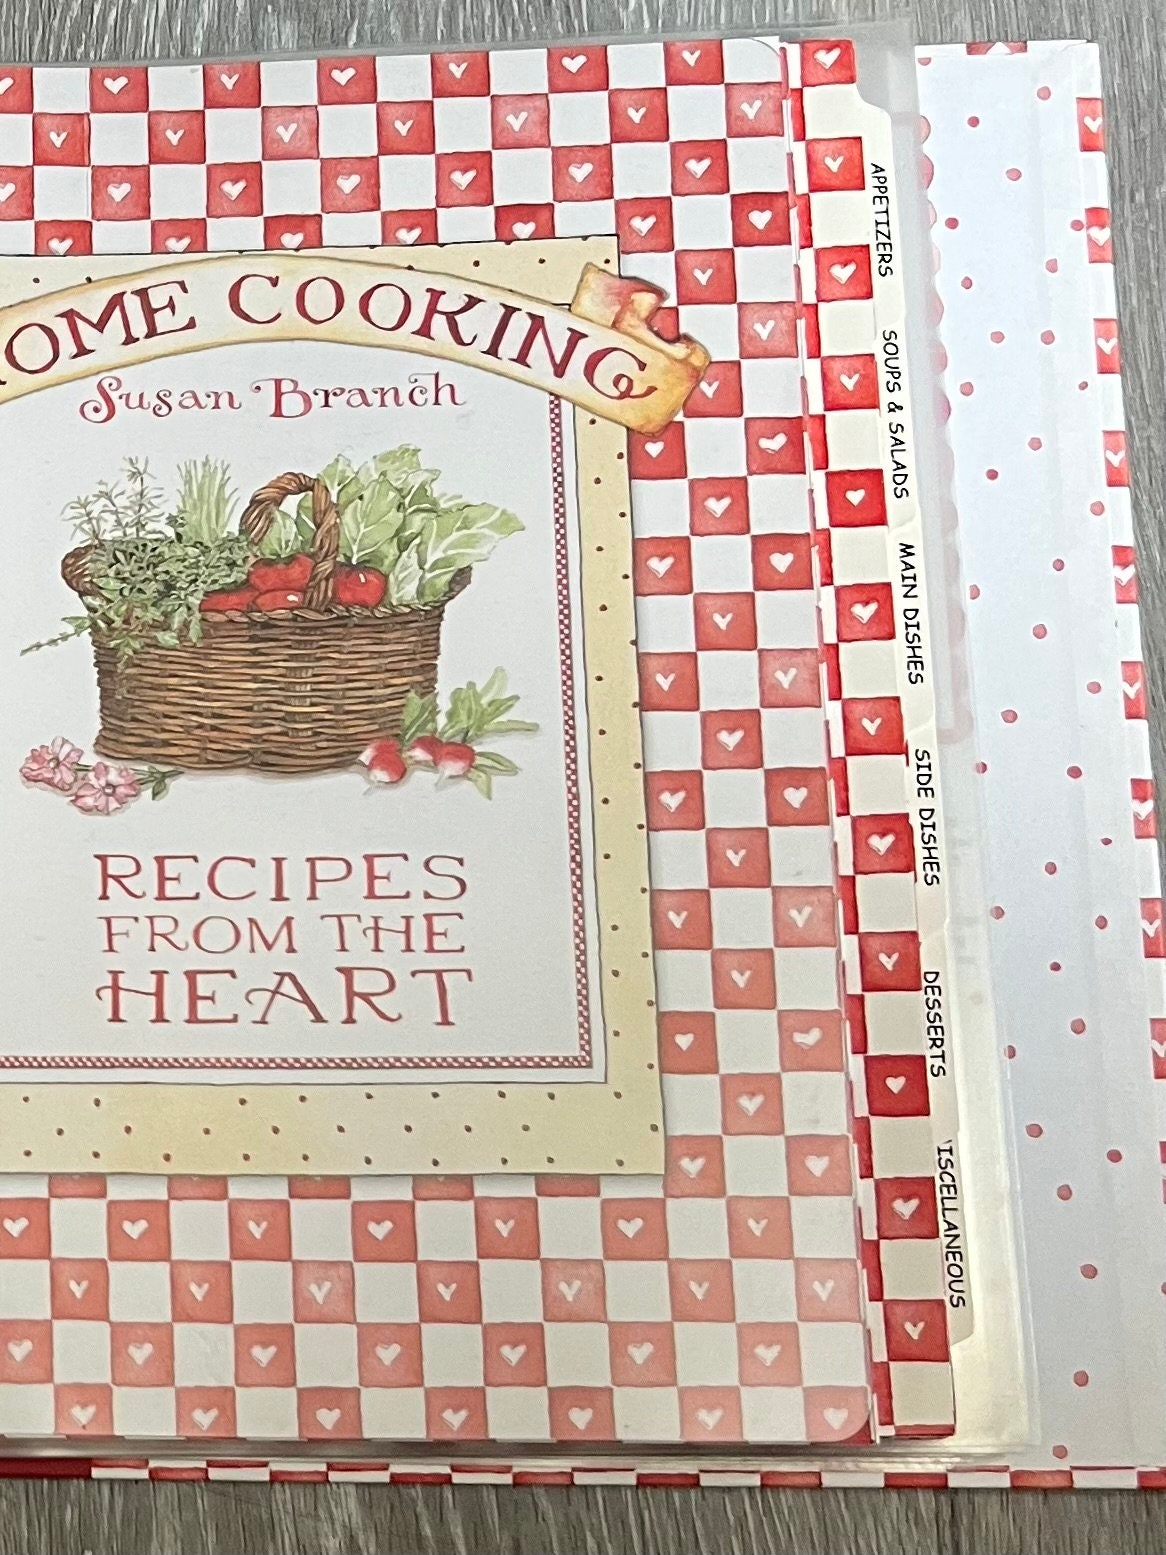 Susan Branch Recipes From the Heart Home Cooking Binder Organizer 